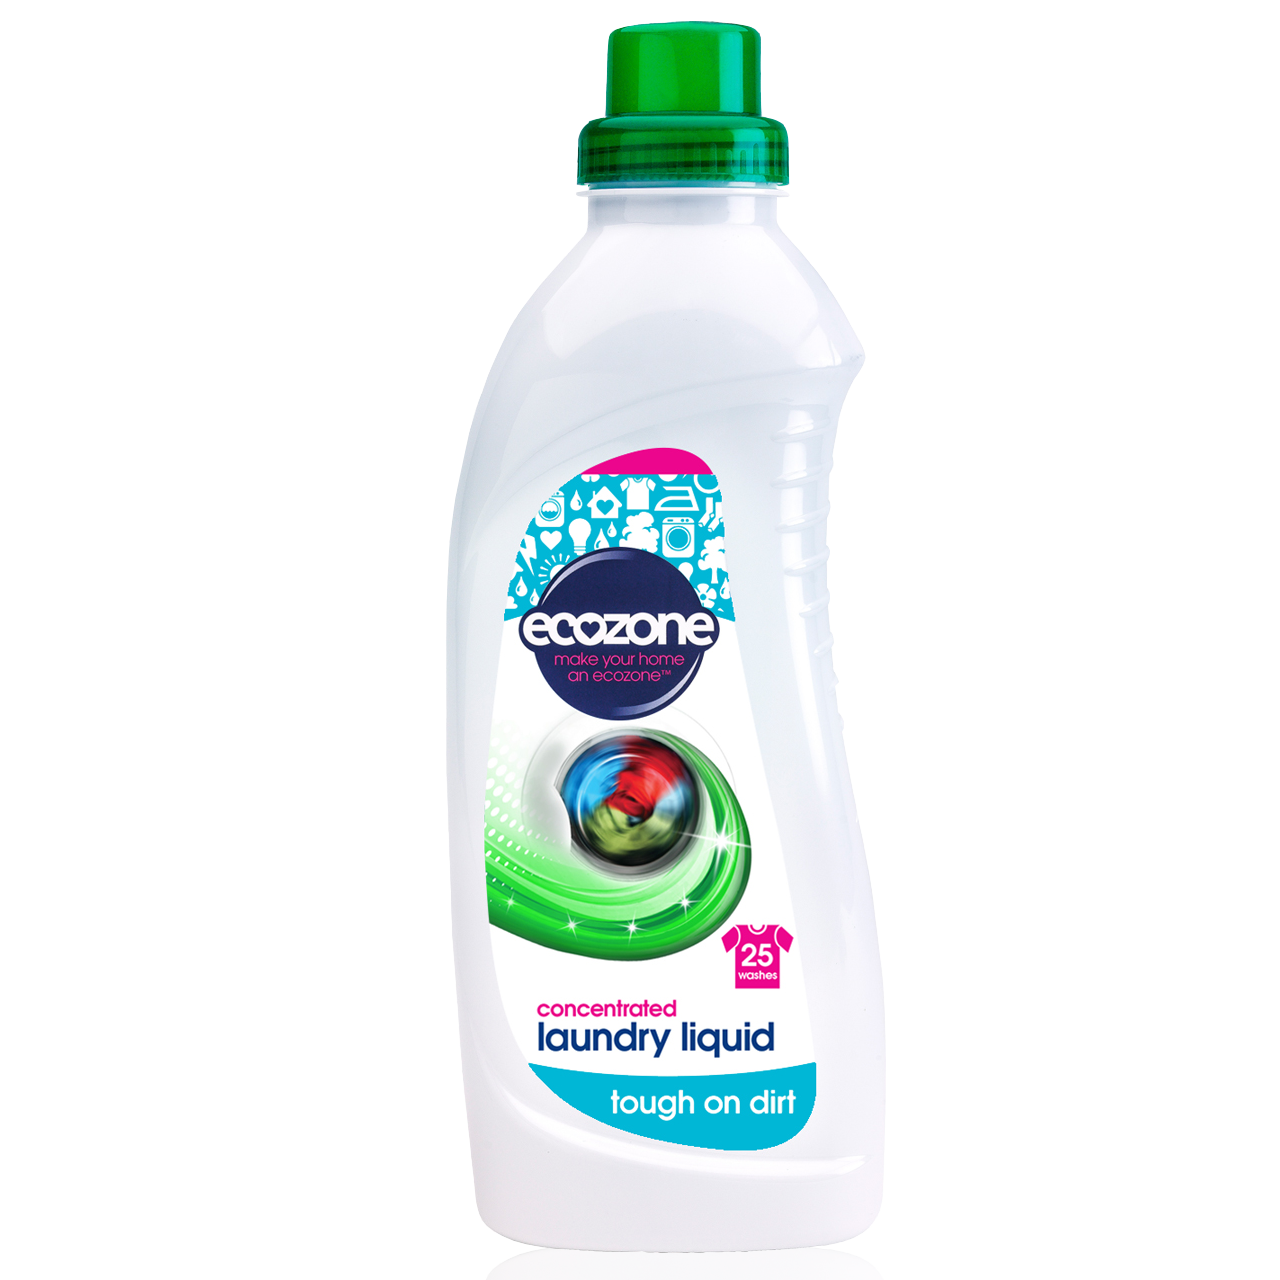 EcoZone Concentrated Bio Laundry Liquid 1 Ltr (25 Washes)